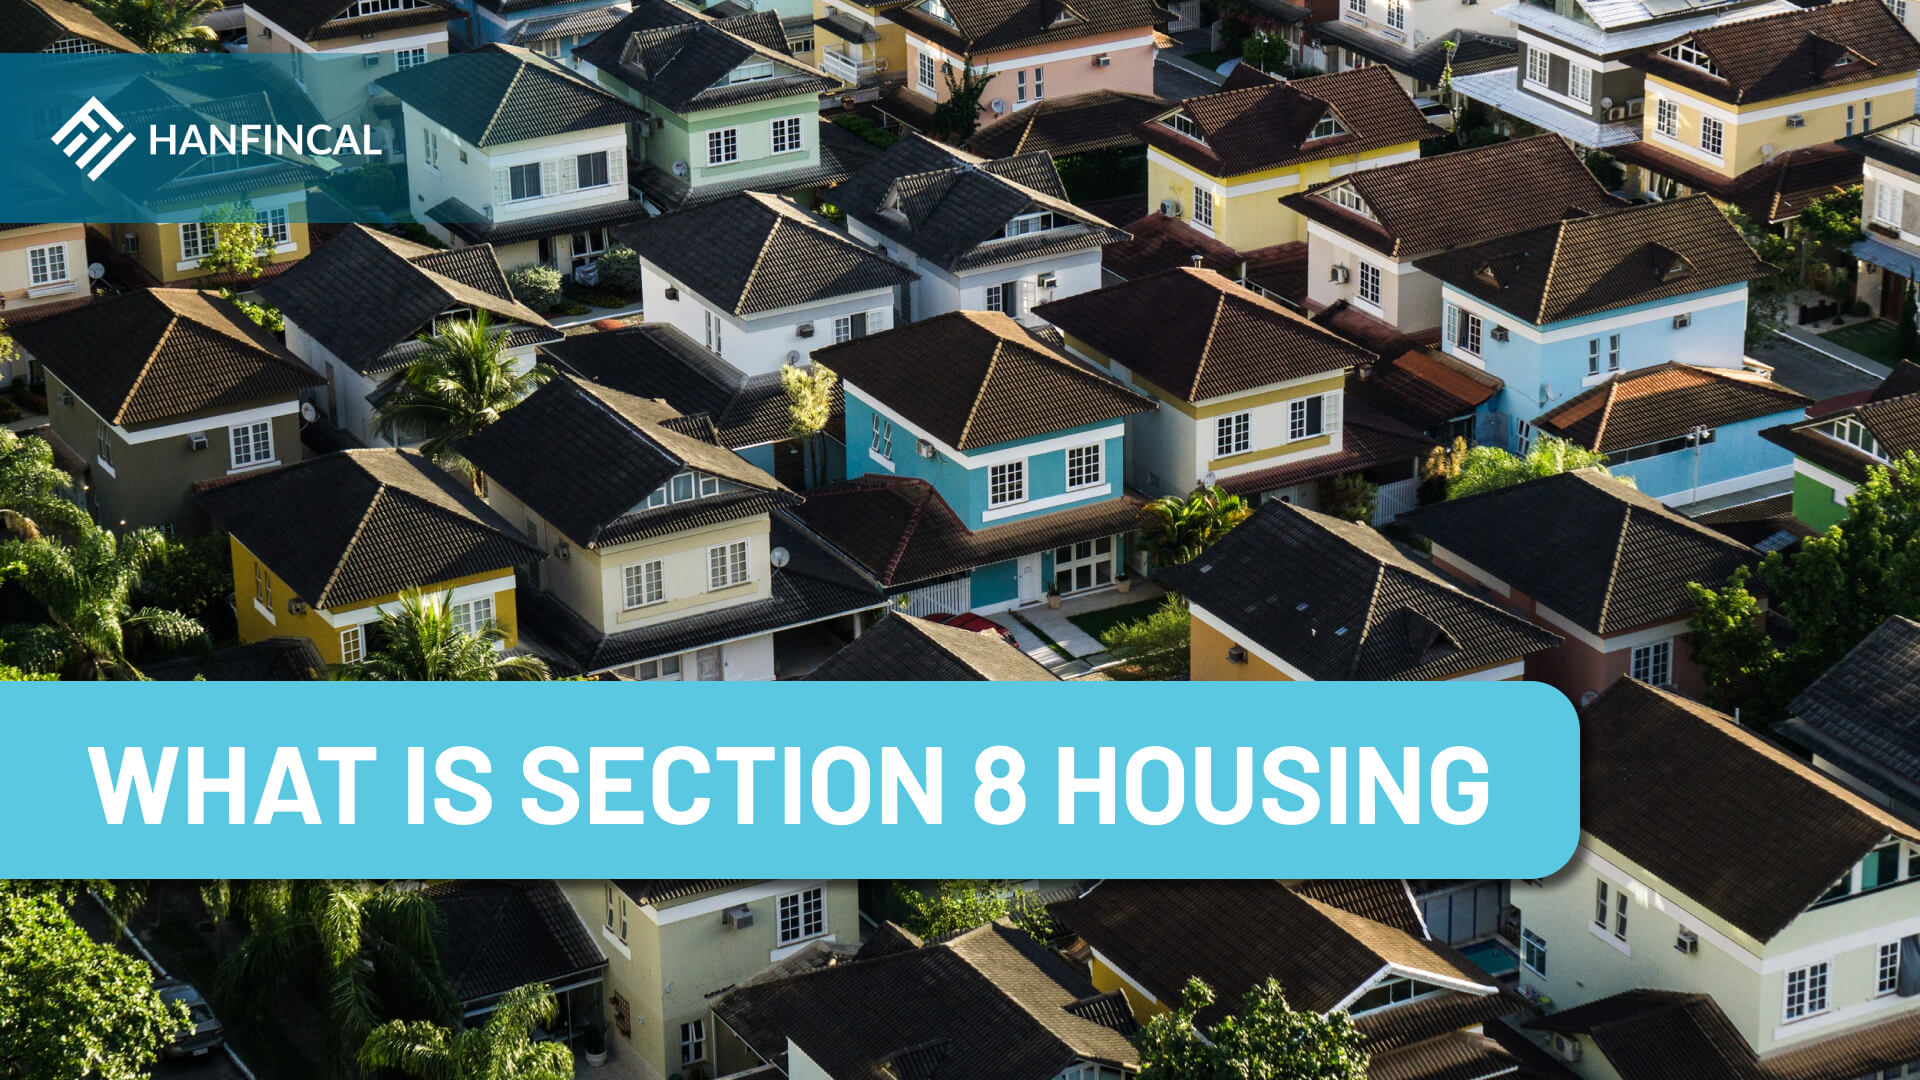 What is Section 8 housing?